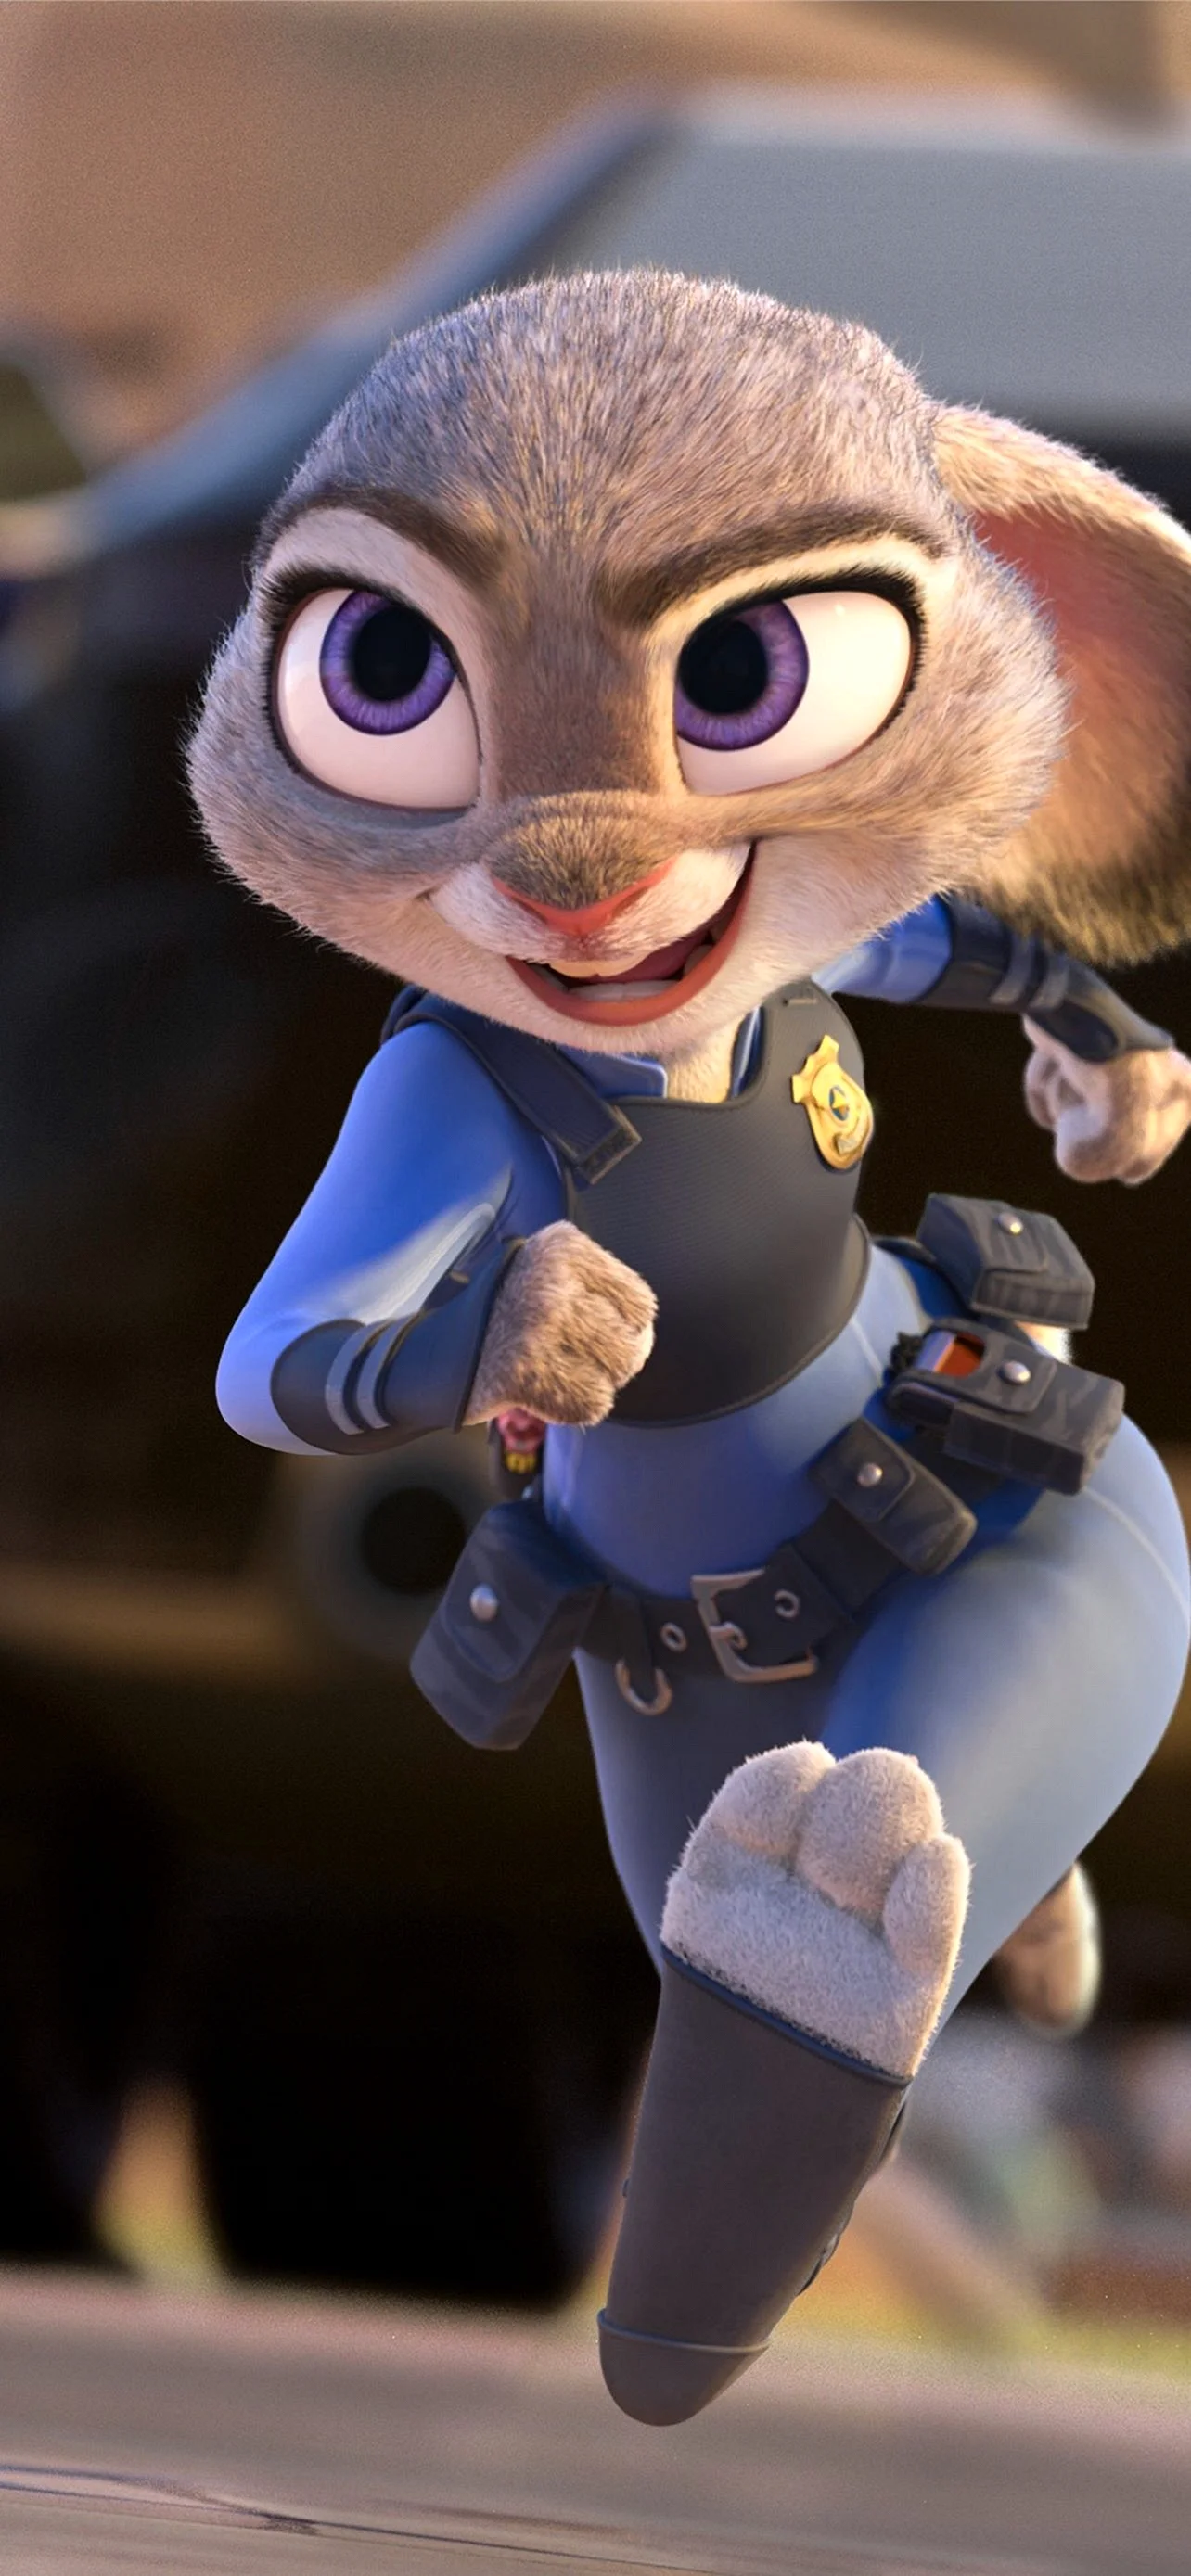 Judy Hopps Wallpaper for iPhone 13 Pro Max